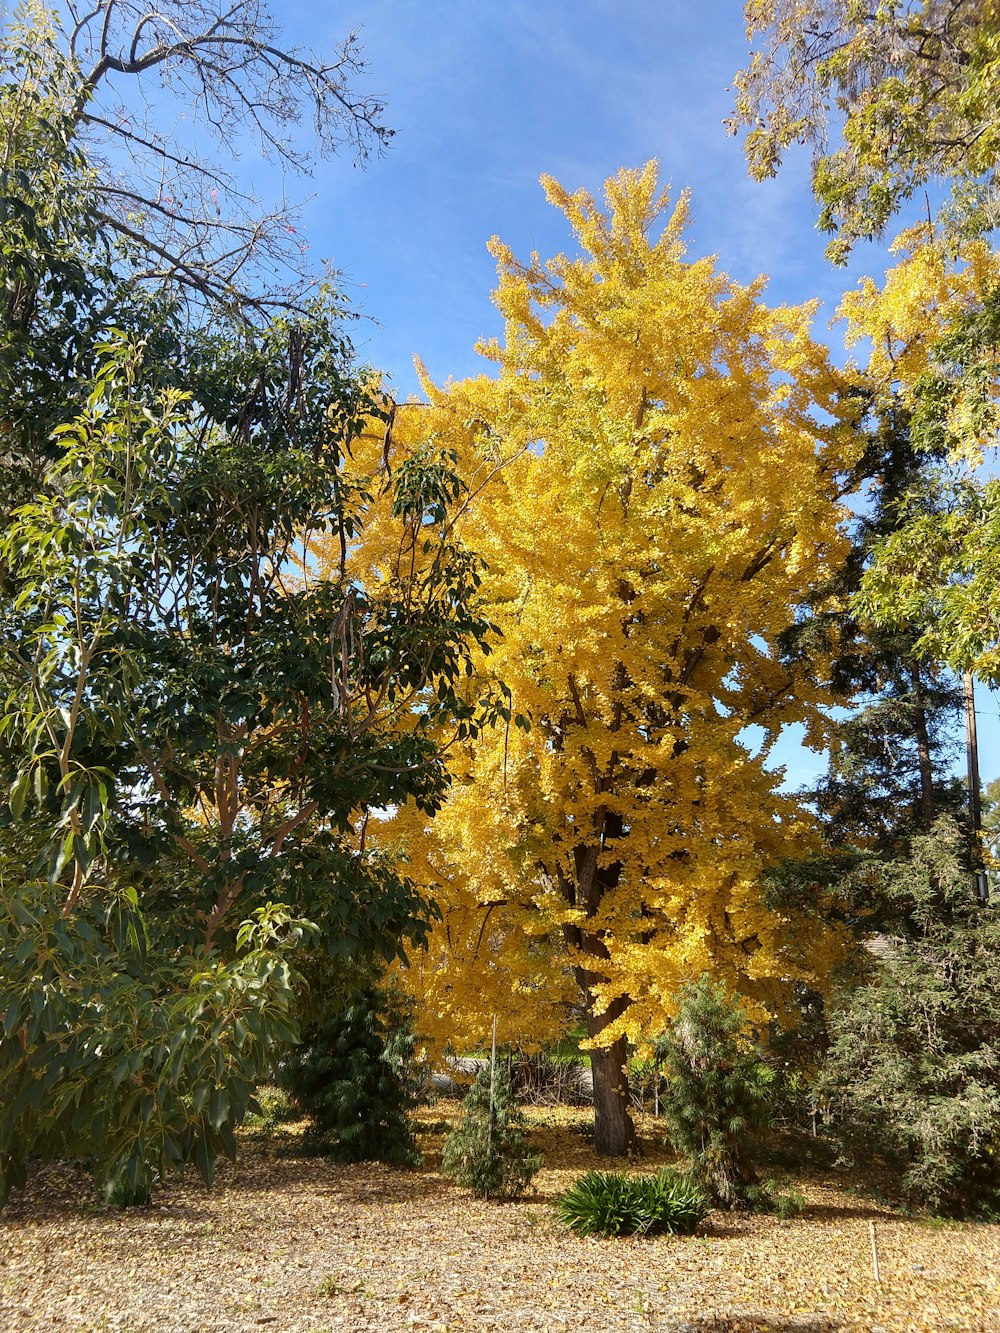 green and yellow tree under blue sky during daytime